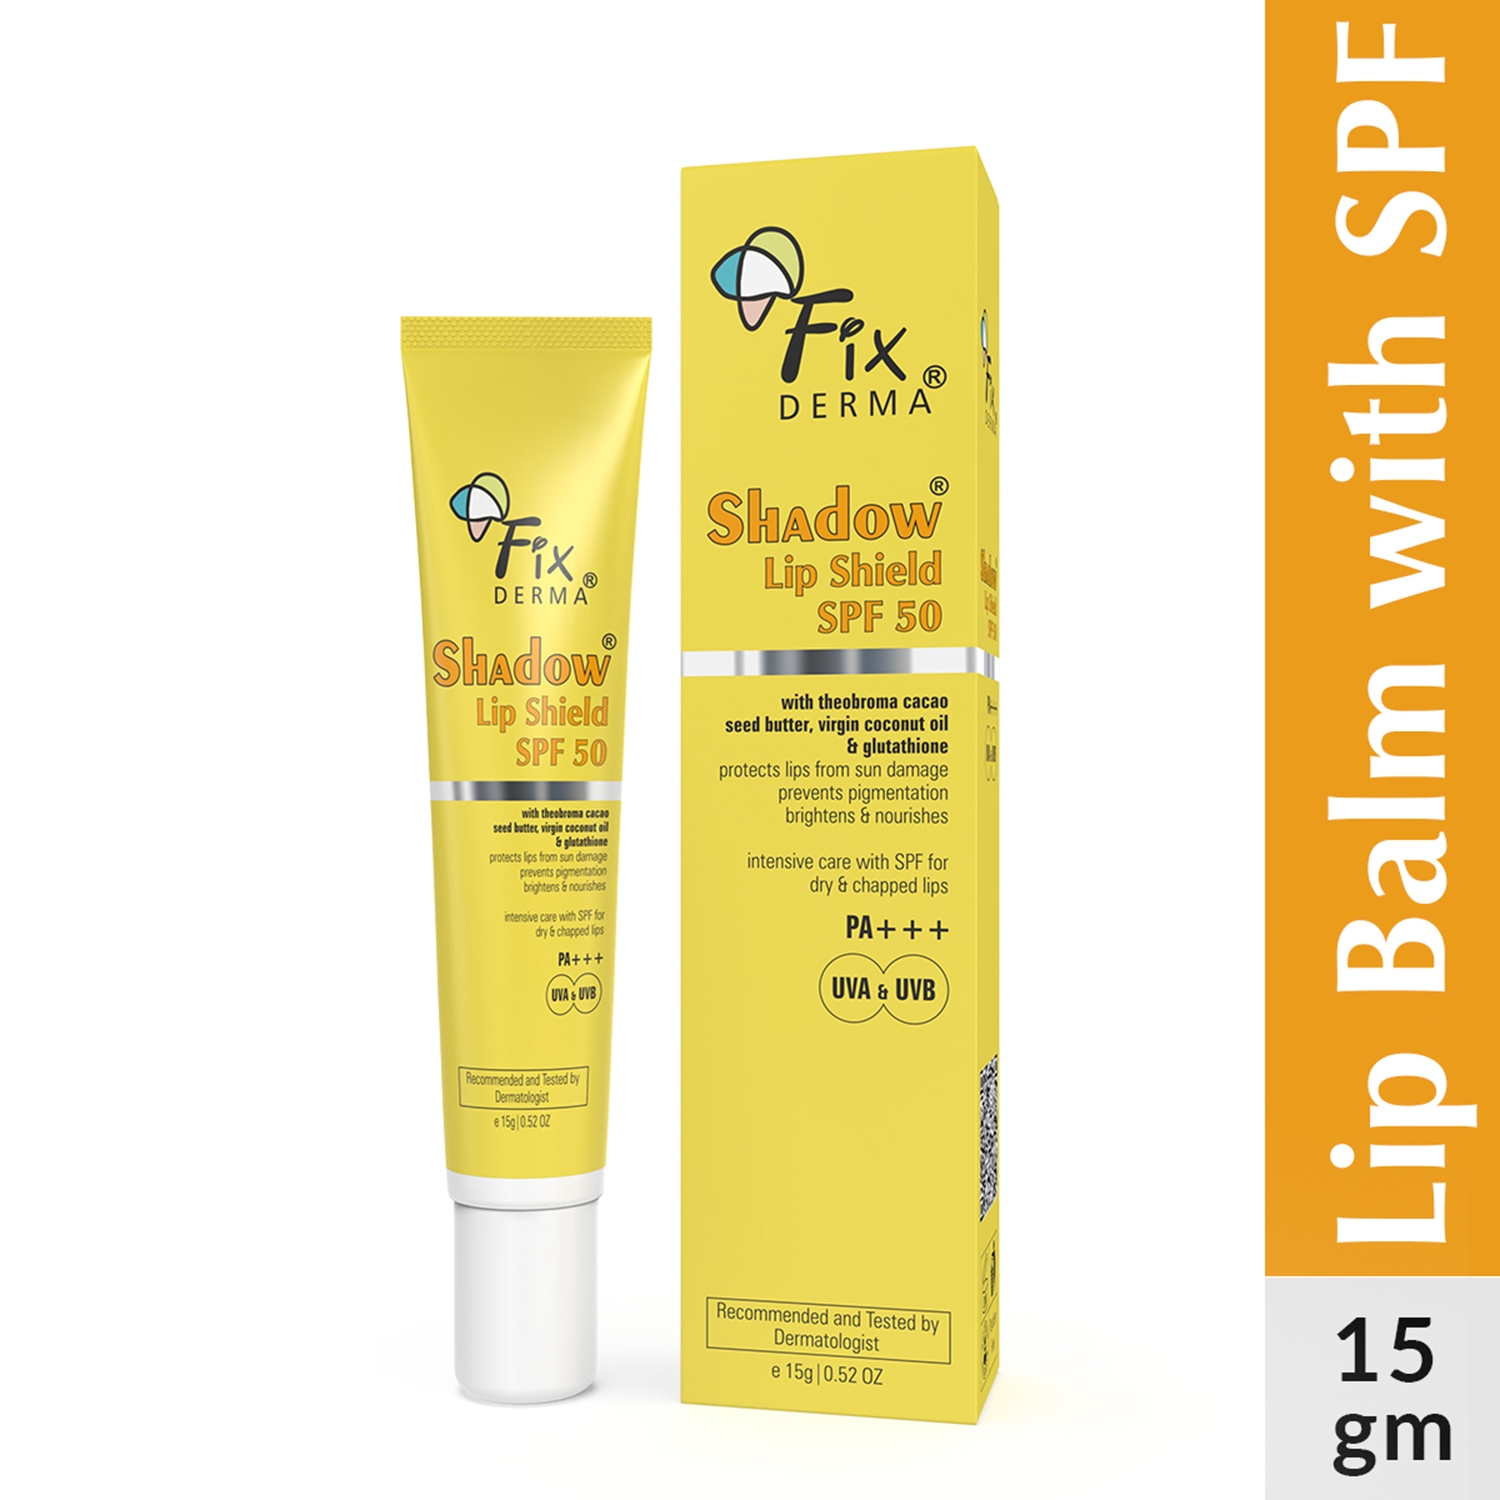 Fixderma | Fixderma Shadow Lip Shield Balm SPF 50 with Theobroma Cacao Seed Butter, Virgin Coconut Oil (15g)